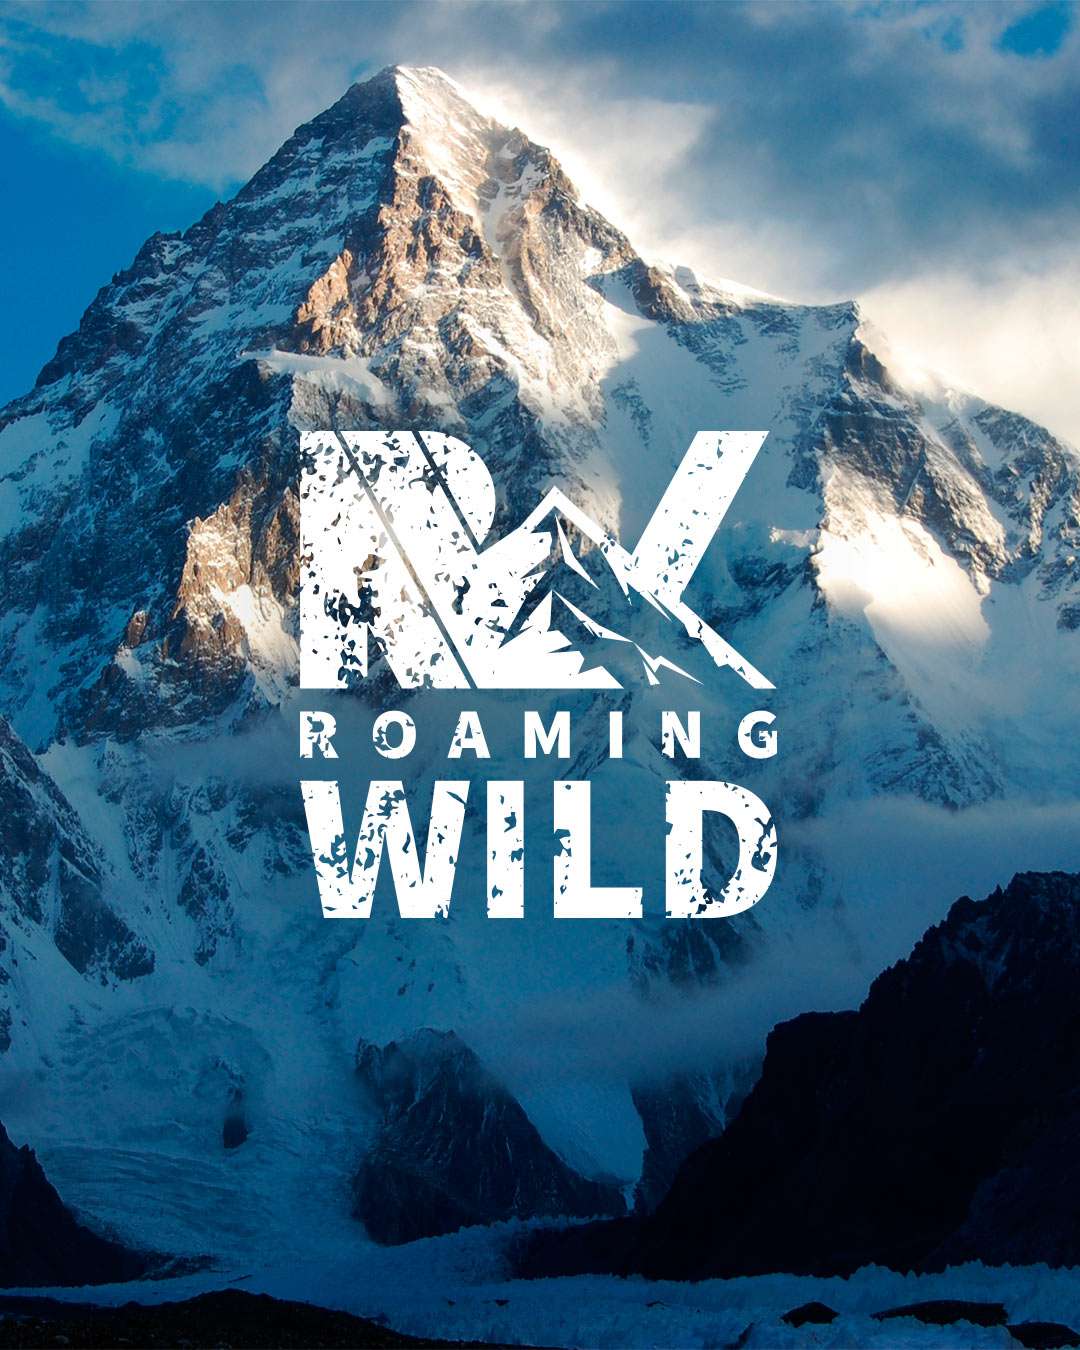 A scene of a massive, snowcapped Himalayan mountain overlayed with the Roaming Wild logo.